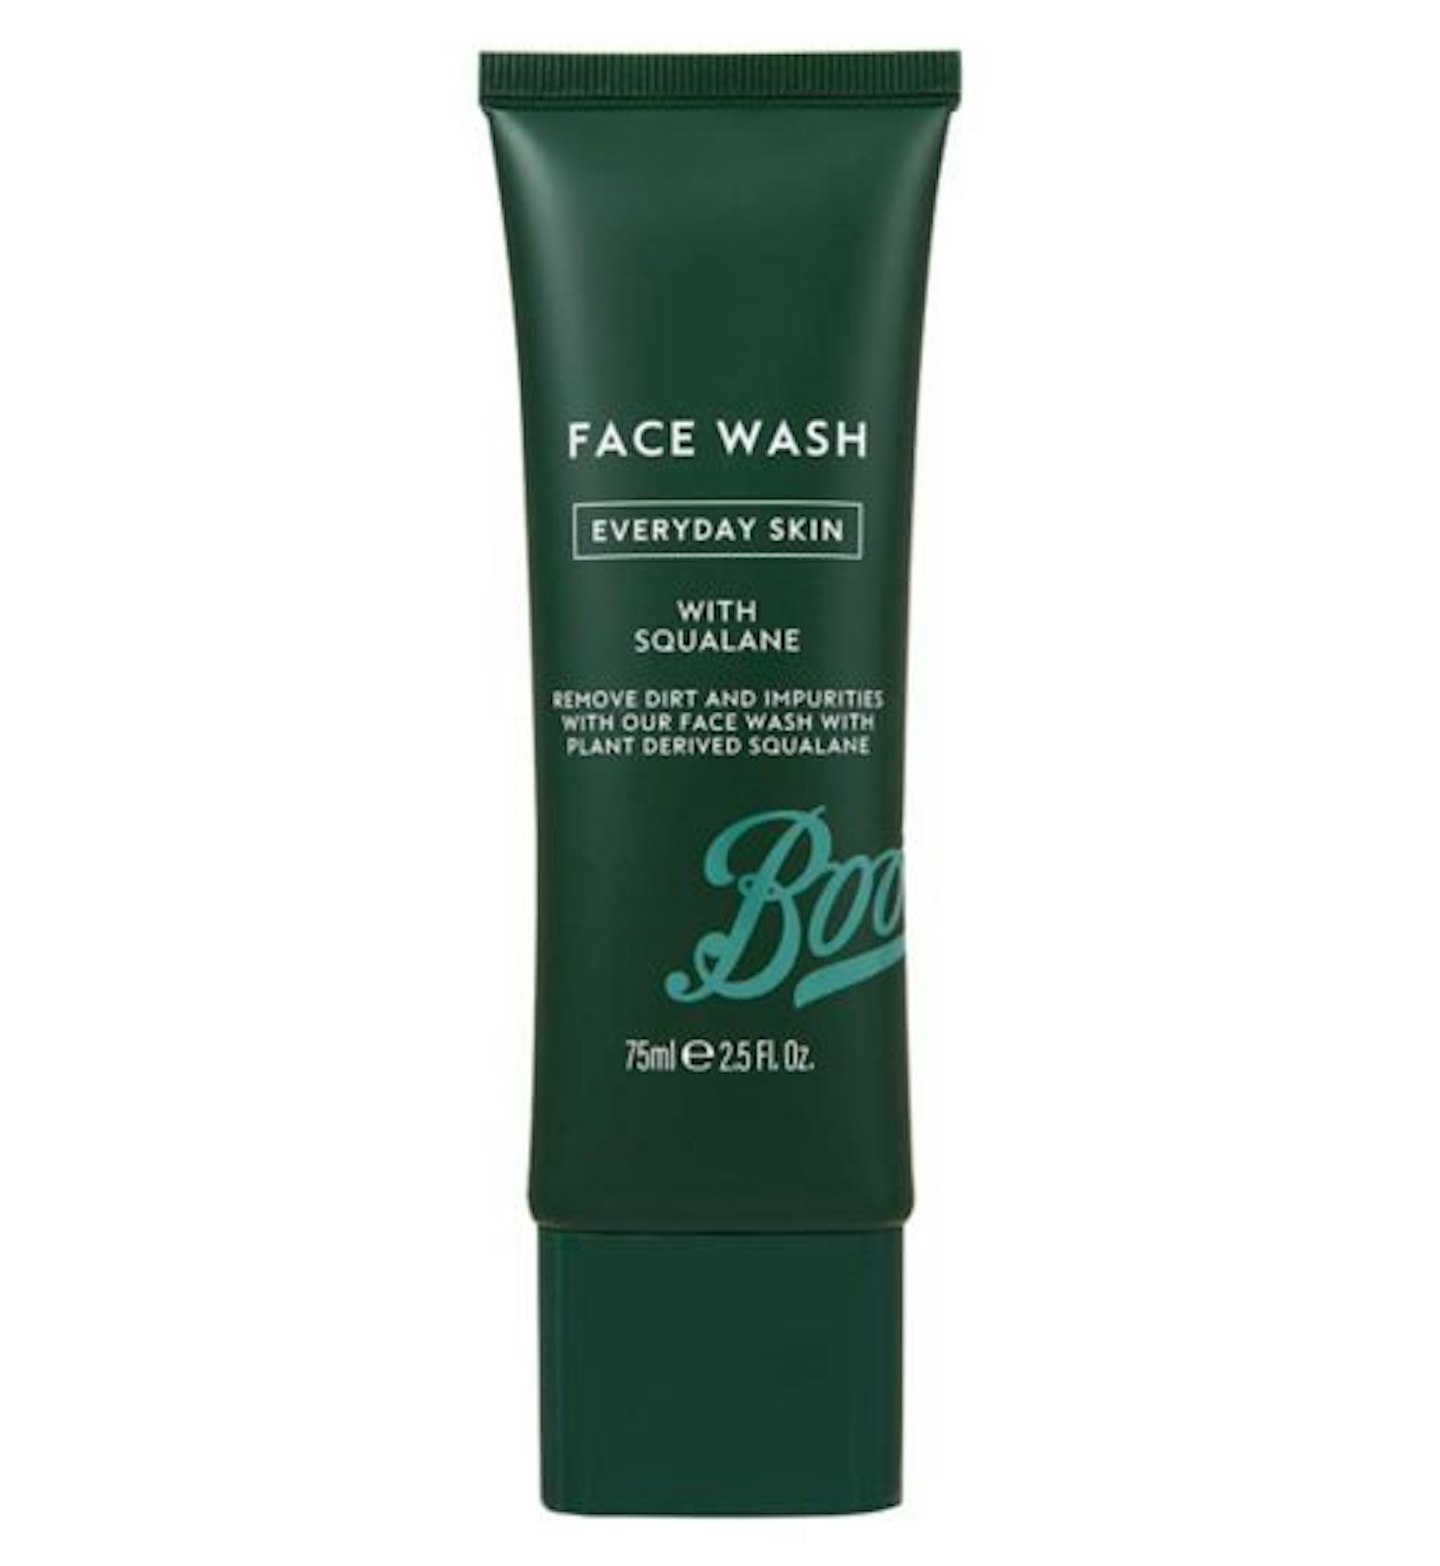 Boots Everyday Skin Squalane Face Wash